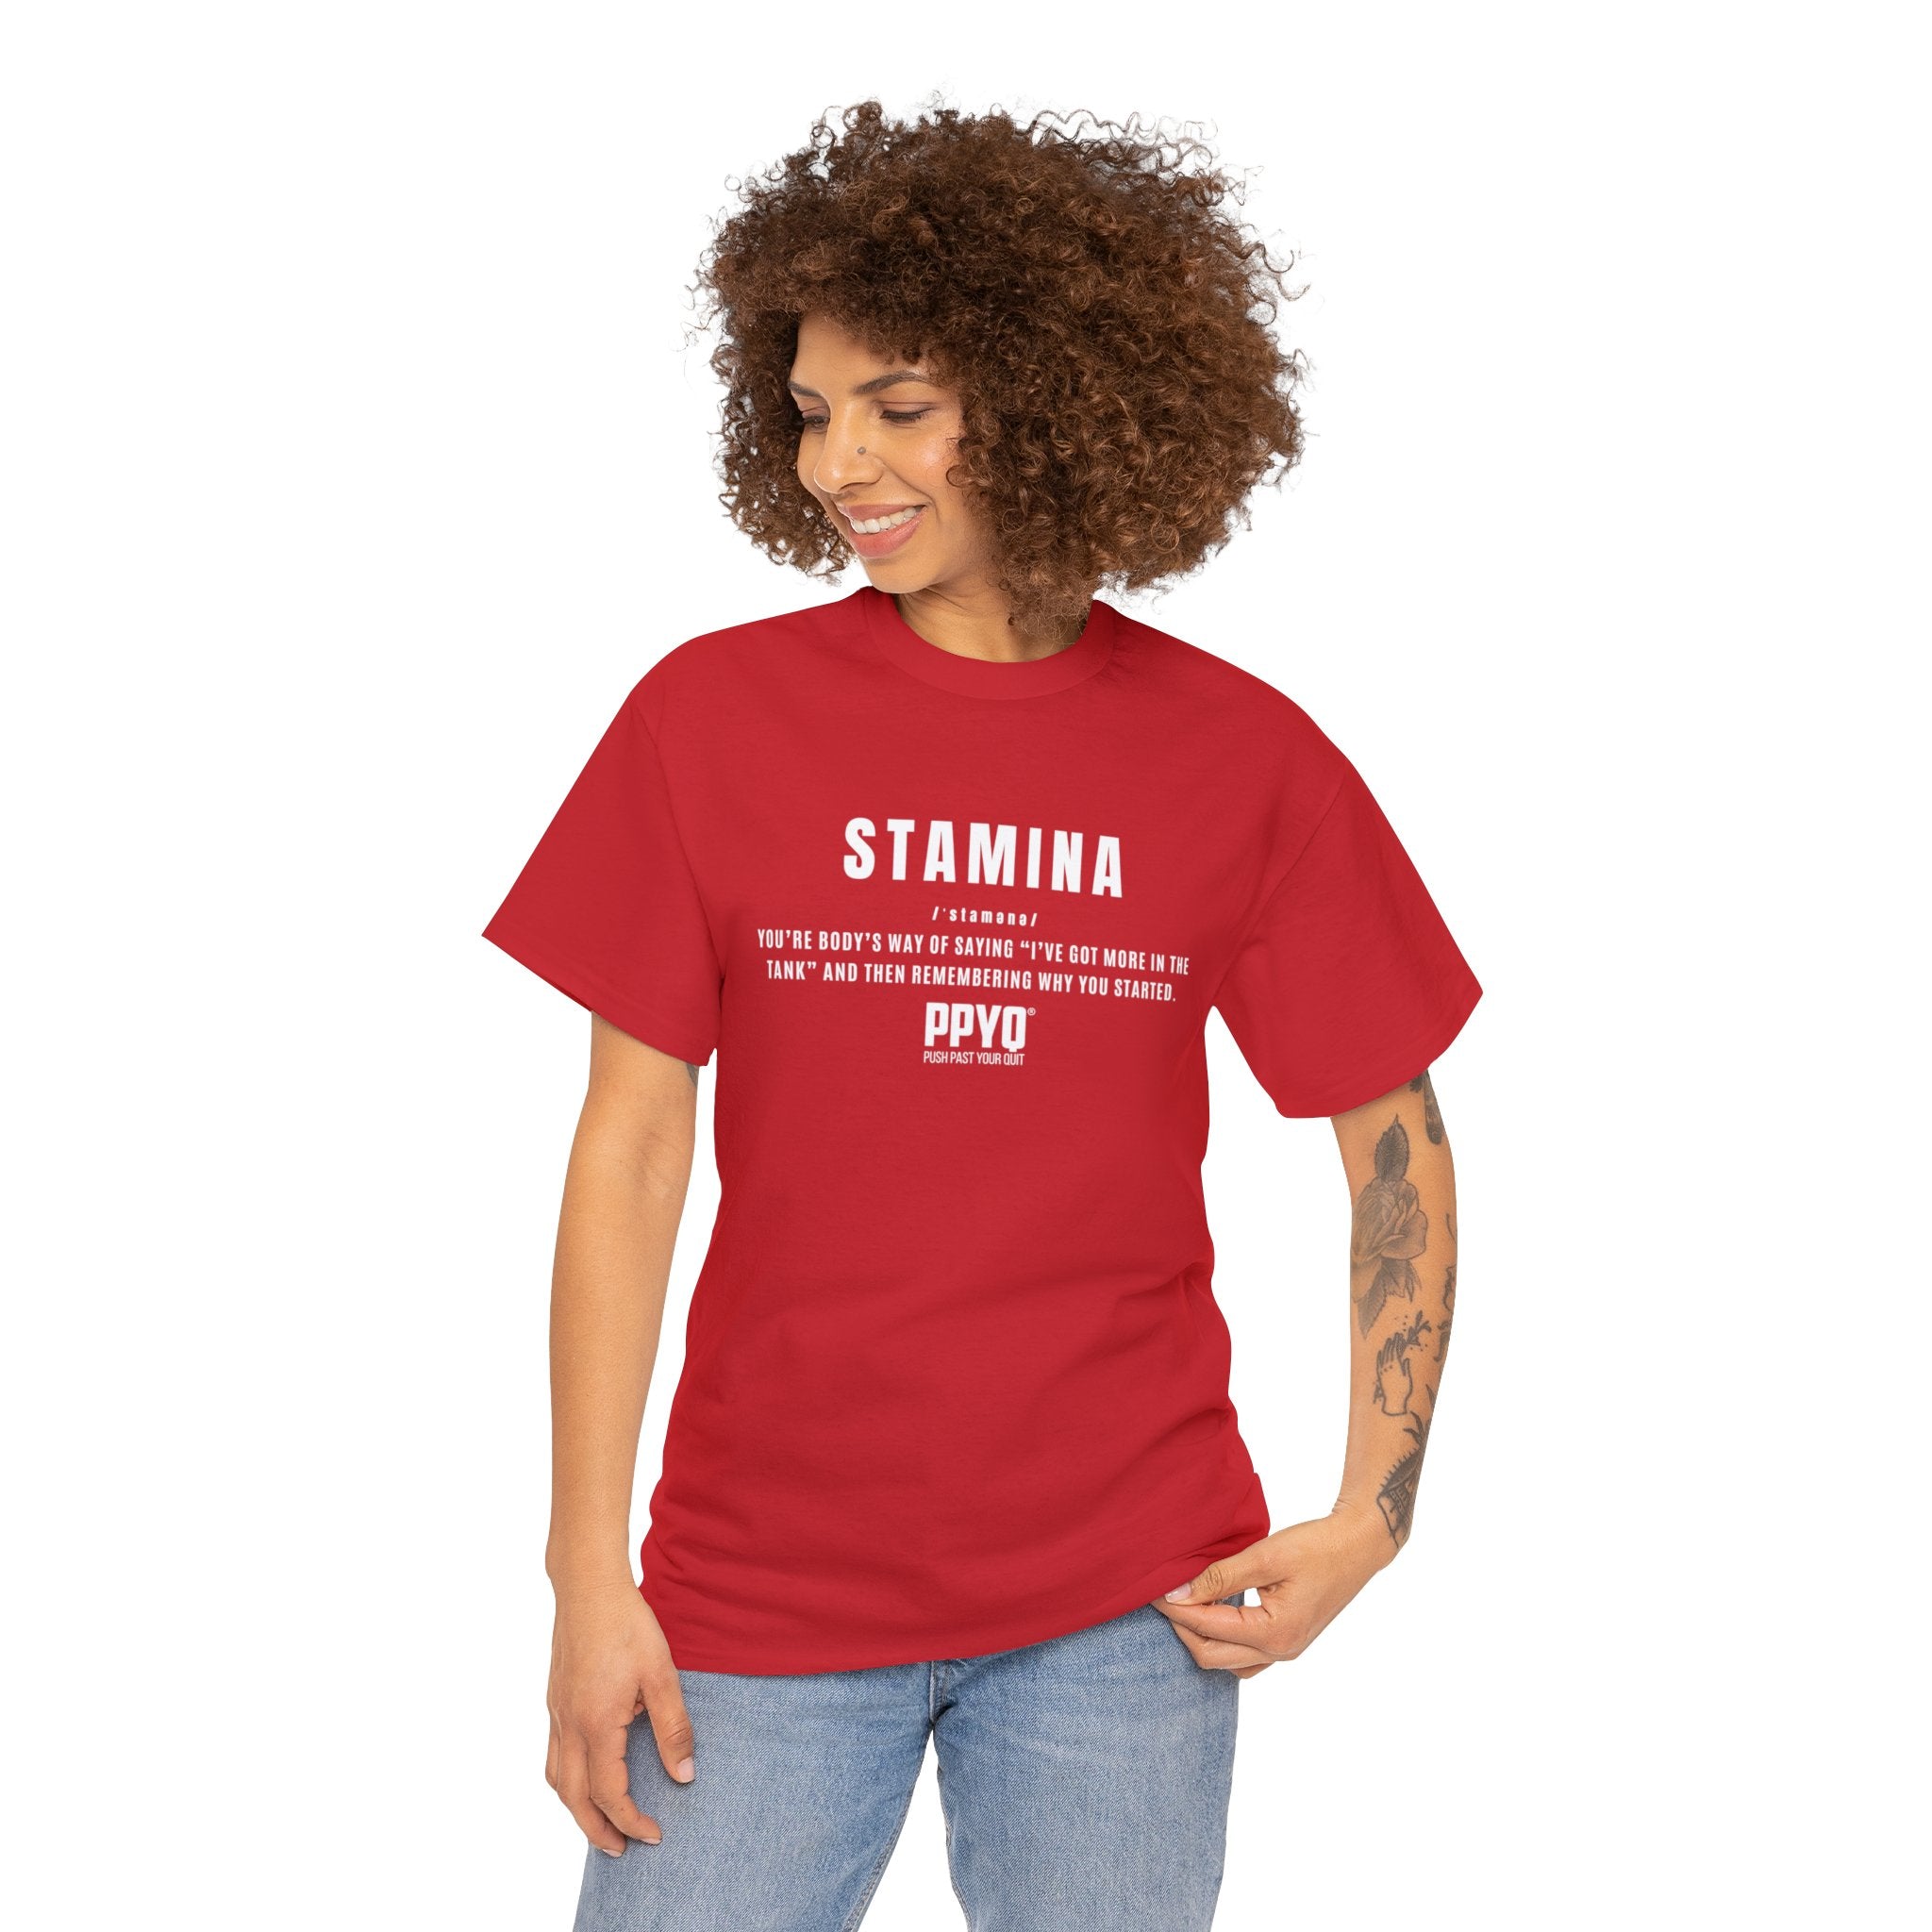 Stamina PPYQ® Defined Tee